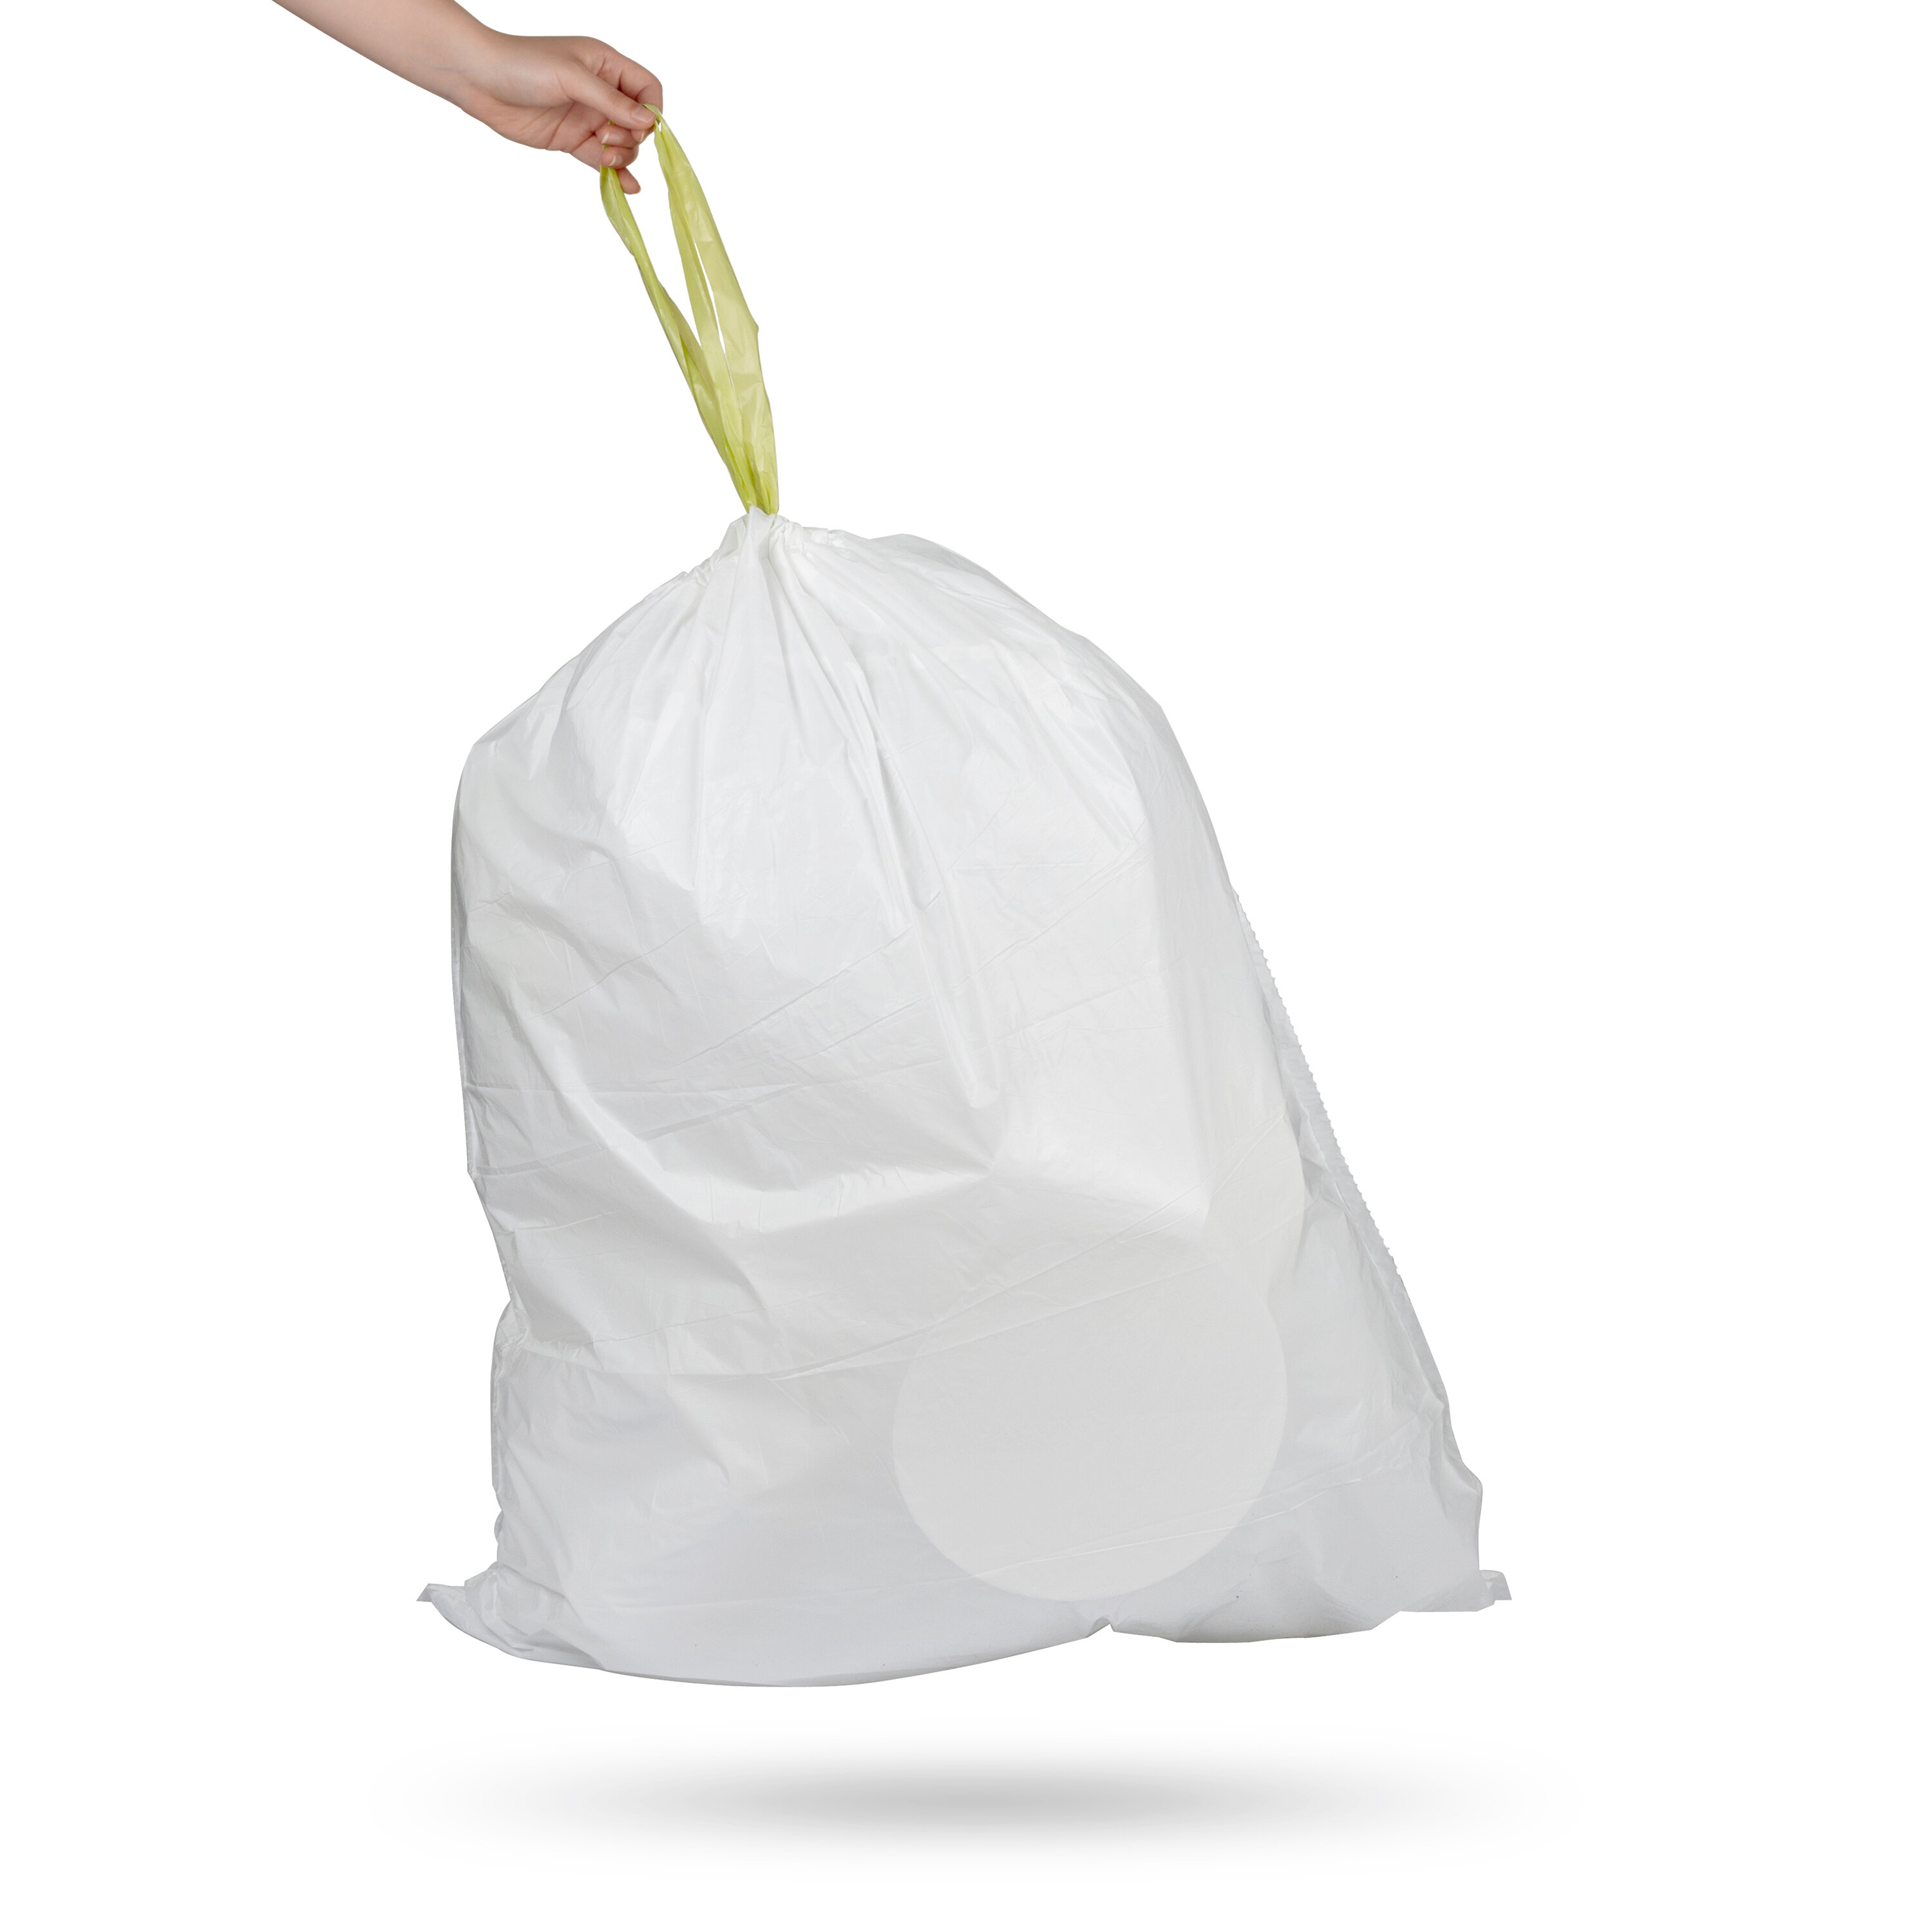 Innovaze 13 gal. Kitchen Trash Bags with Drawstring (135-Count), White